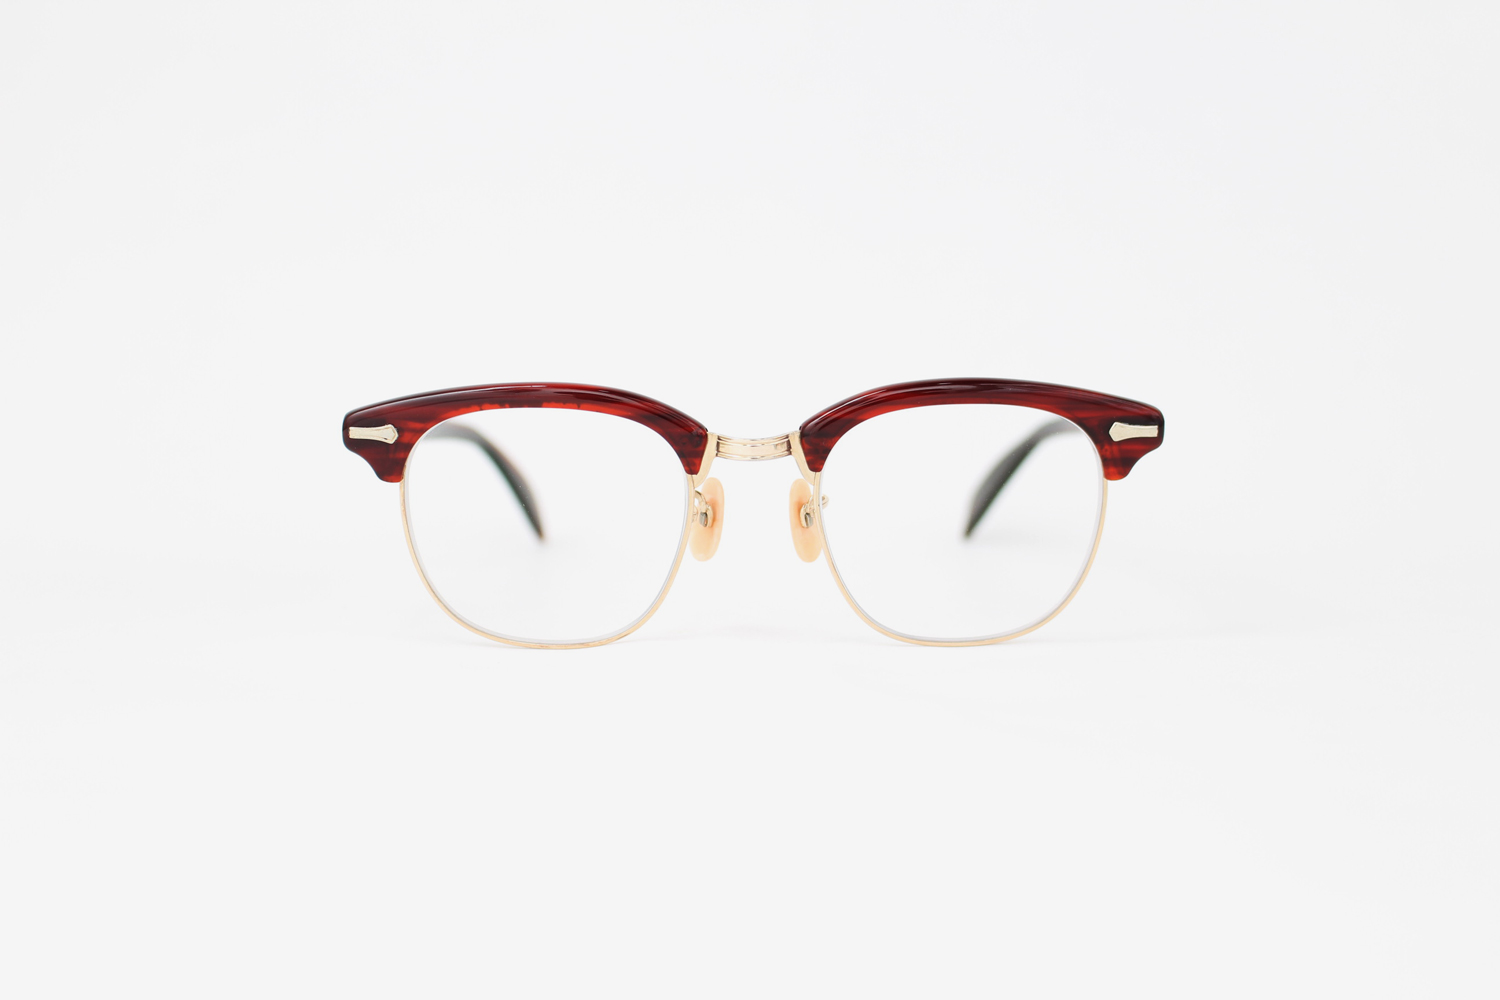 Shuron Optical Company / Combination - R-YG｜The Spectacle